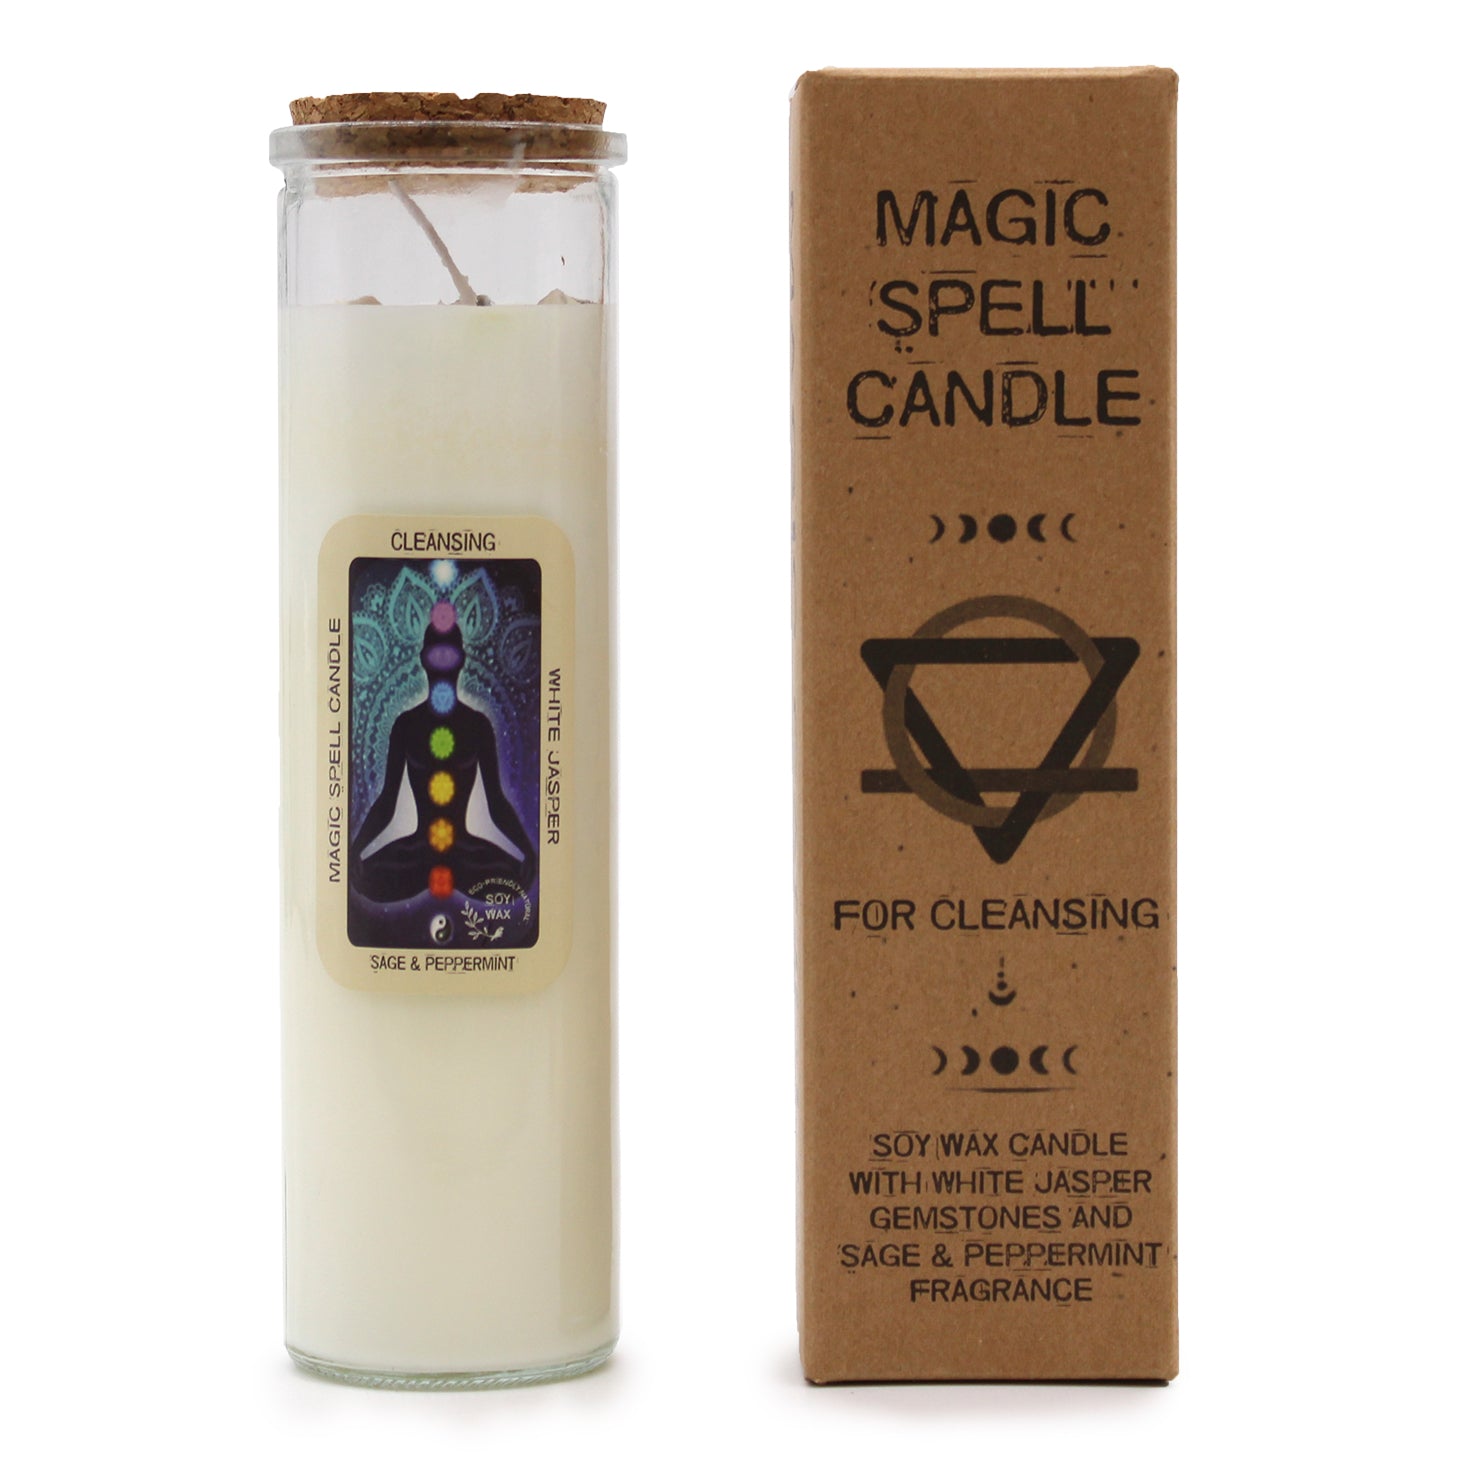 Magic Spell Candle - Cleansing - White Jasper and Sage & Peppermint